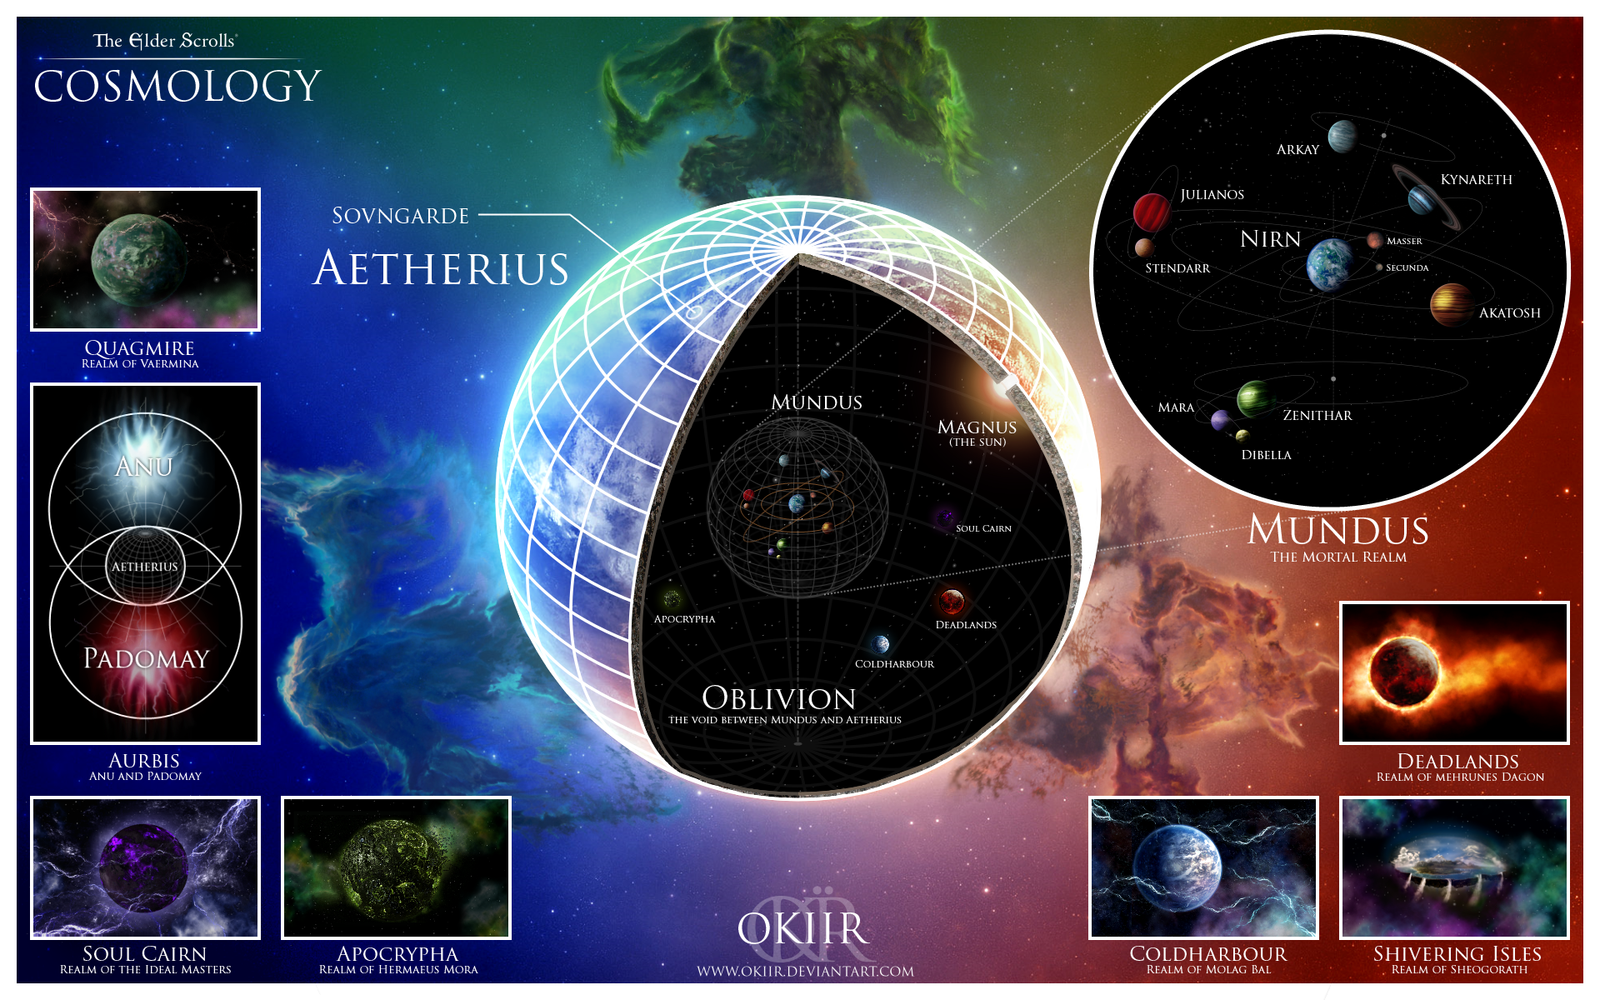 the_elder_scrolls__cosmology_by_okiir-d757i0g.png